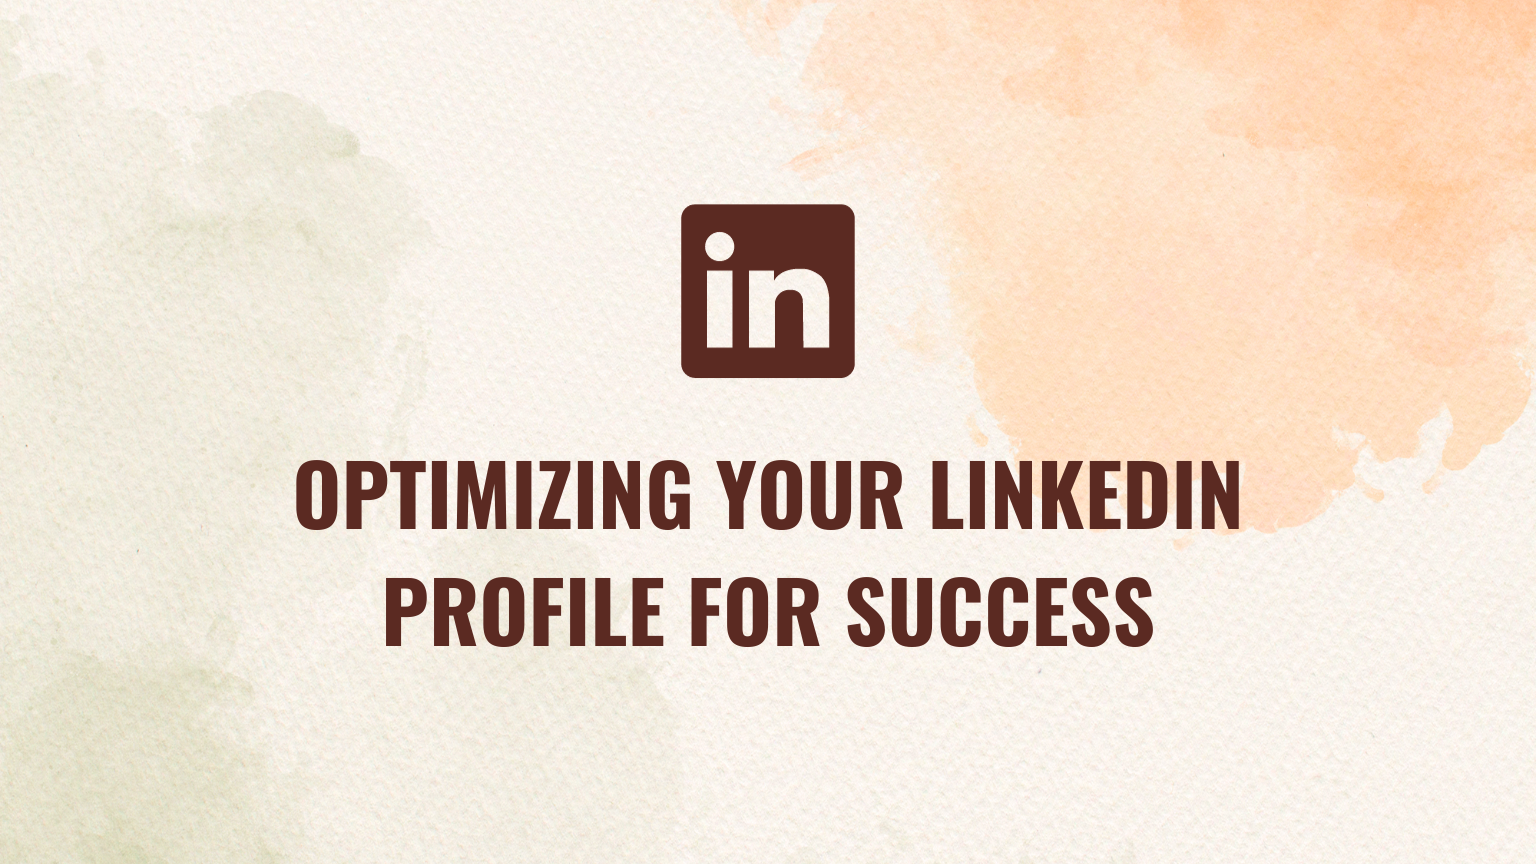 The Complete Guide to Optimizing Your LinkedIn Profile for Success